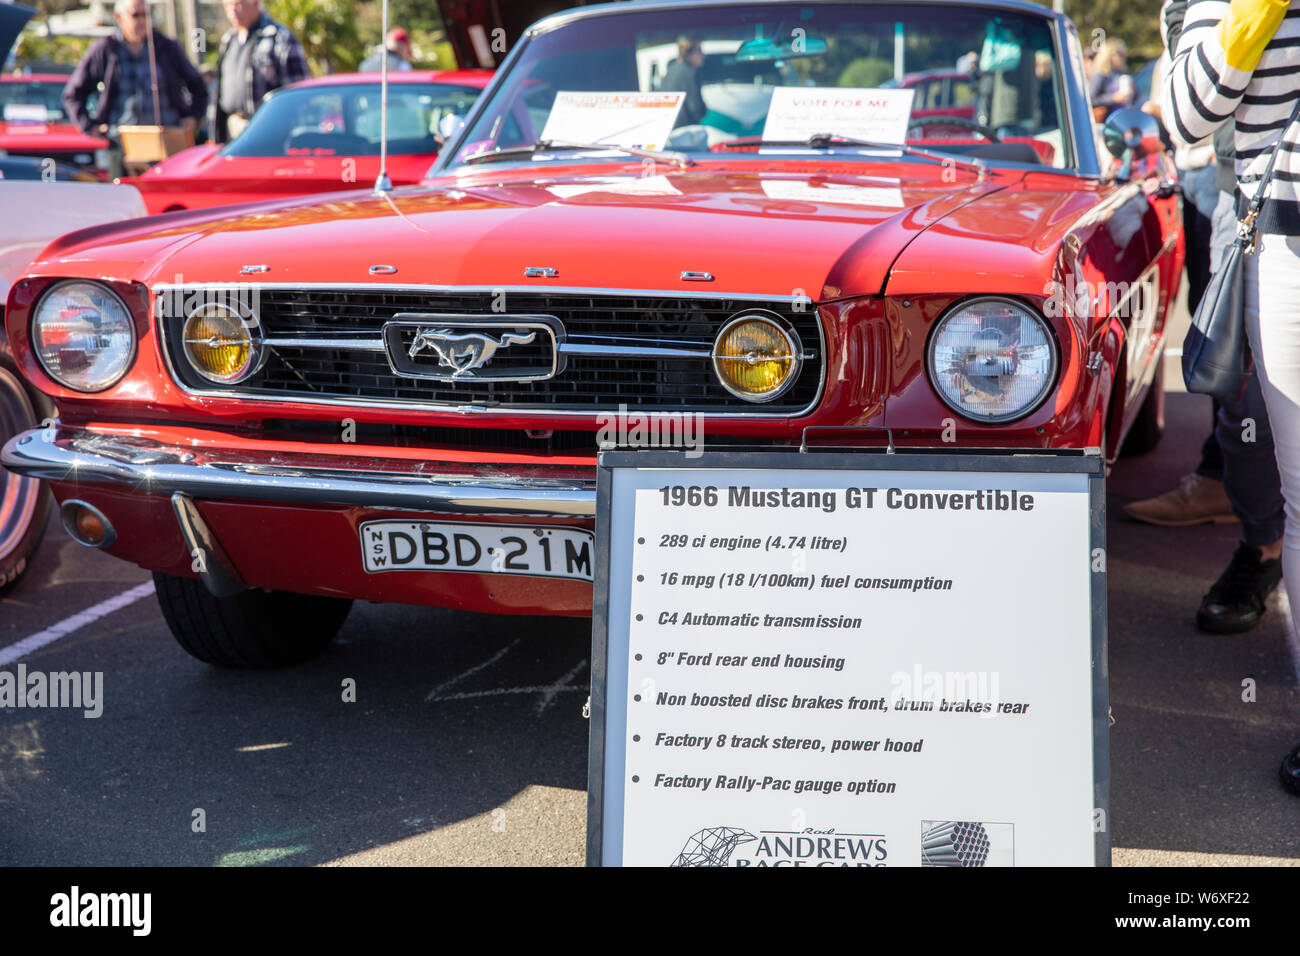 1966 Ford Mustang GT convertible classic car on display a Sydney classic car show,Australia Stock Photo